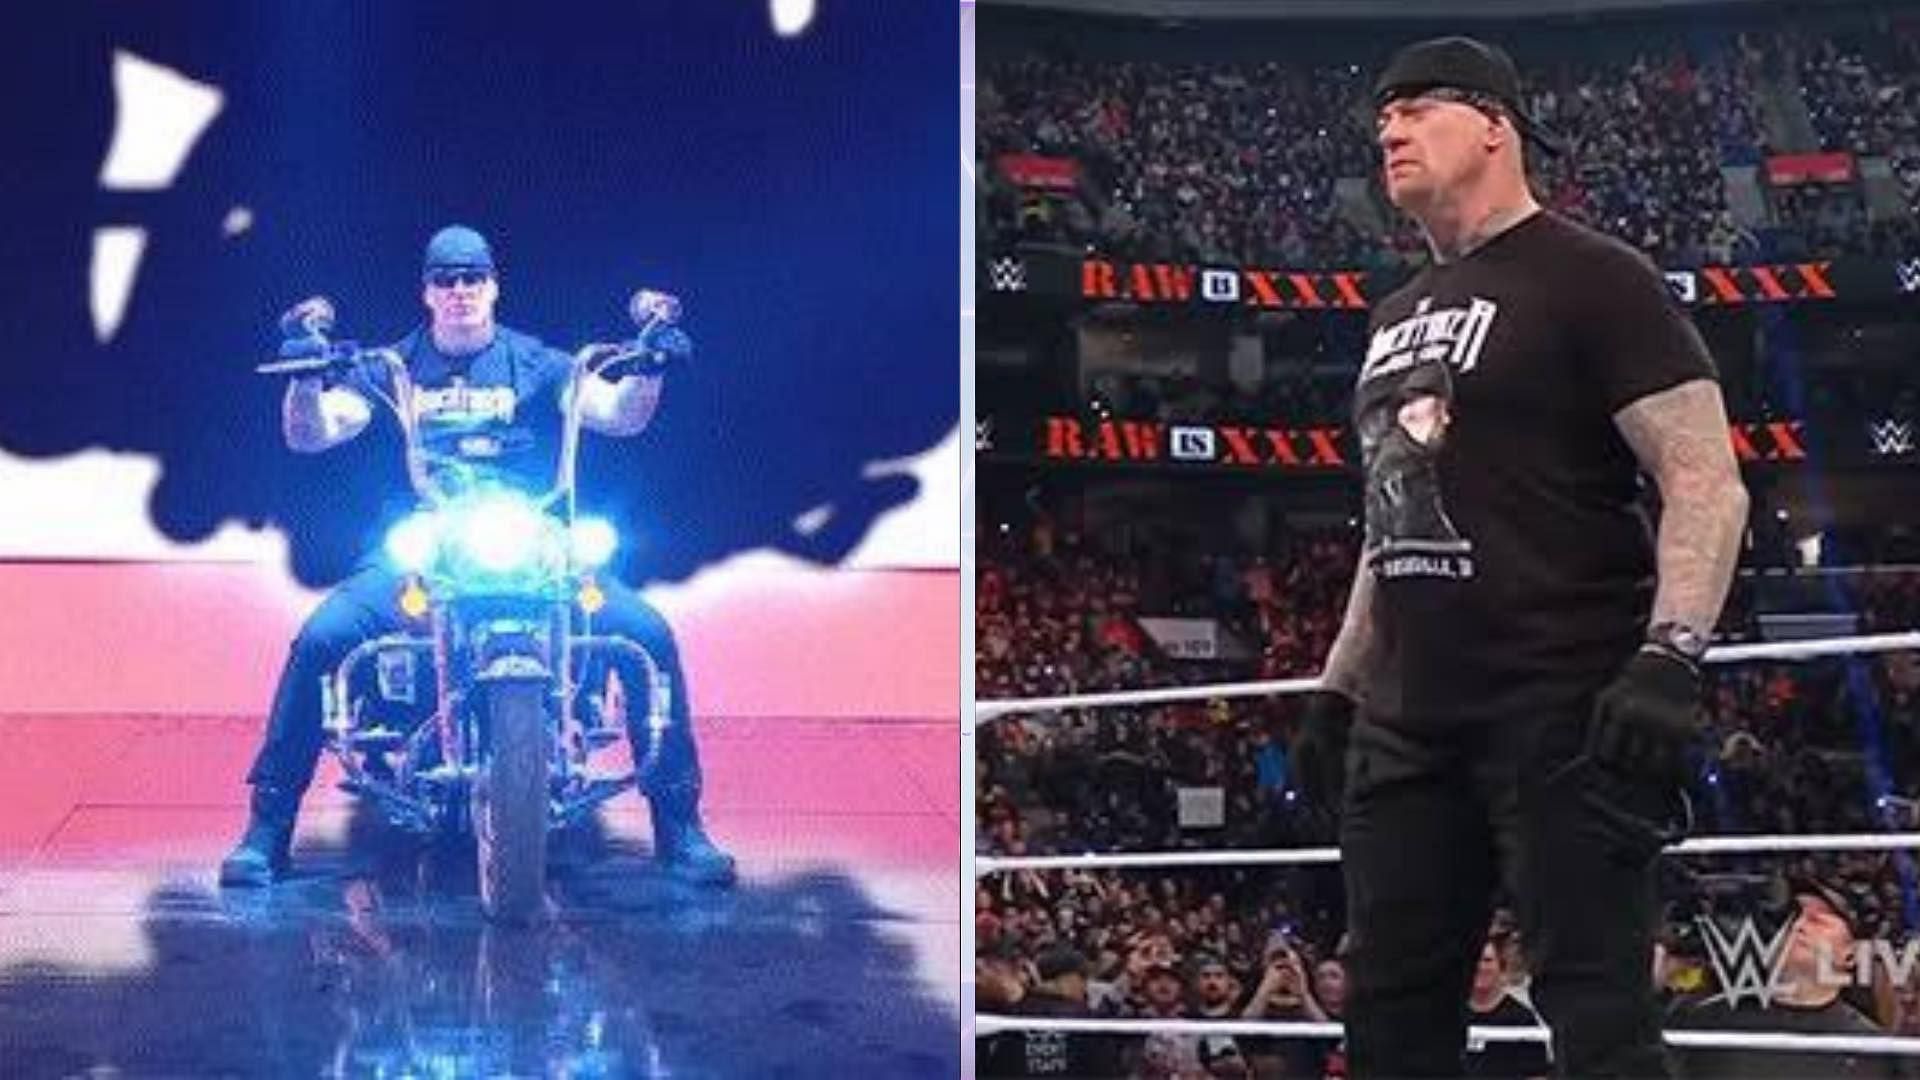 WWE Hall of Famer The Undertaker sends a three-word message to former Universal Champion